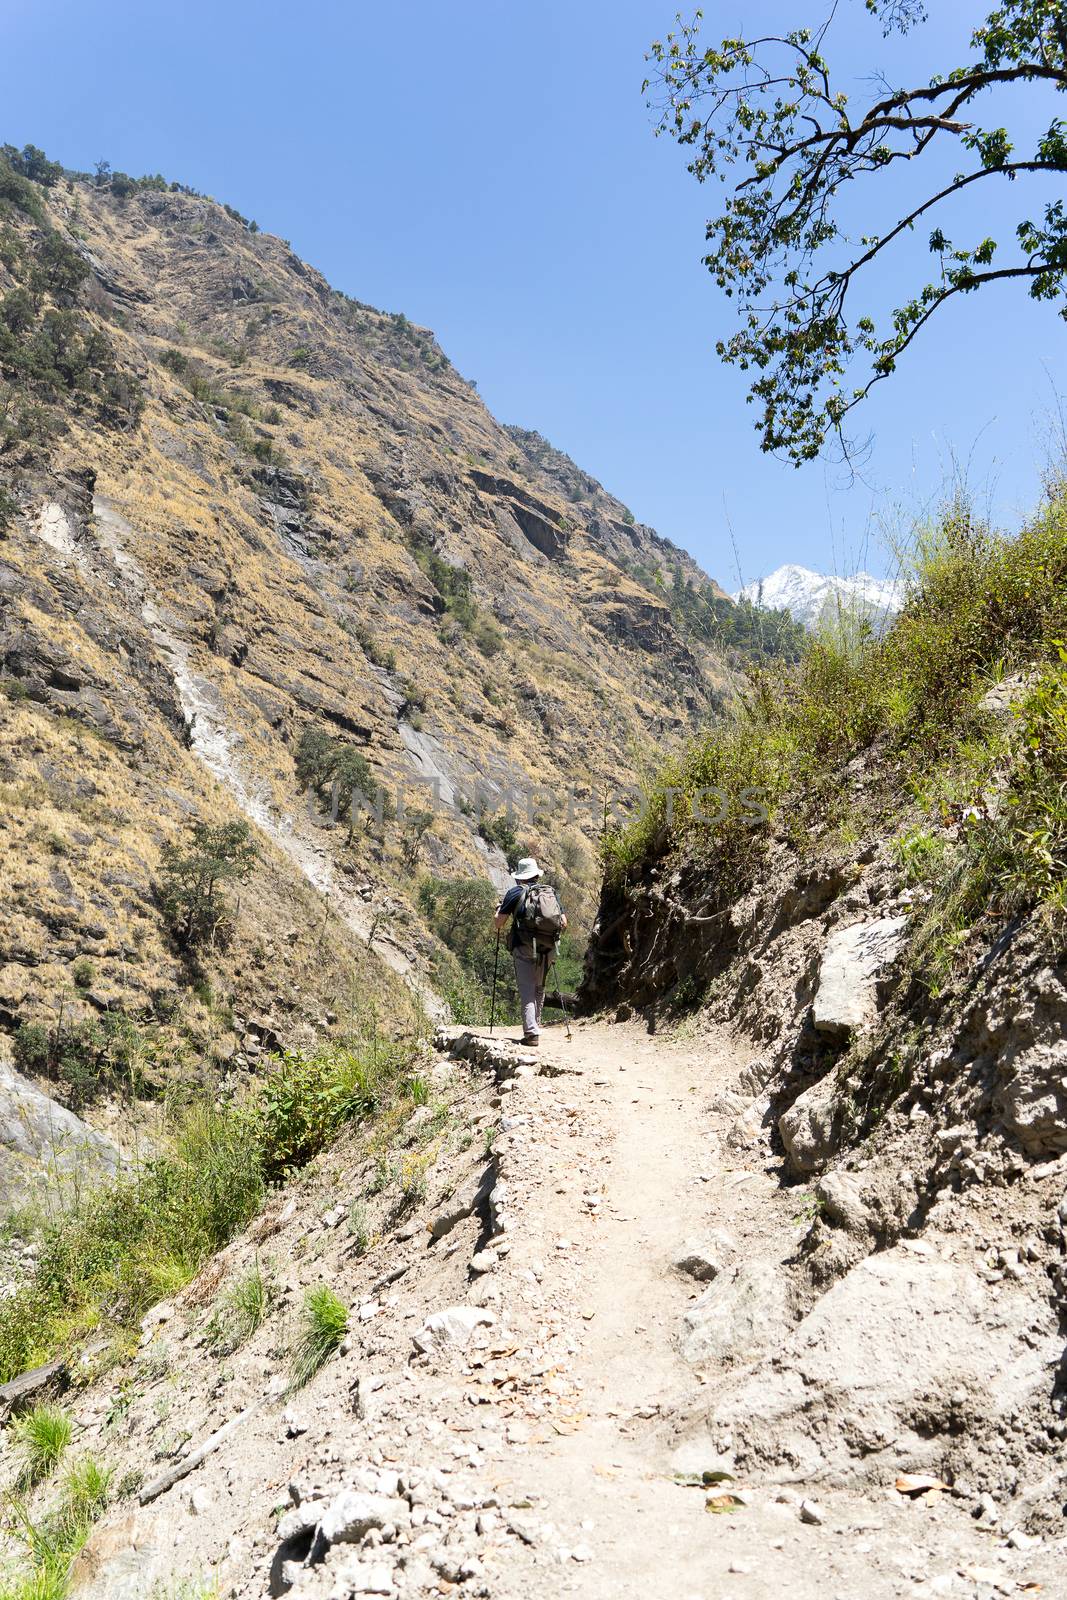 Trekking in Nepal for health and tourism